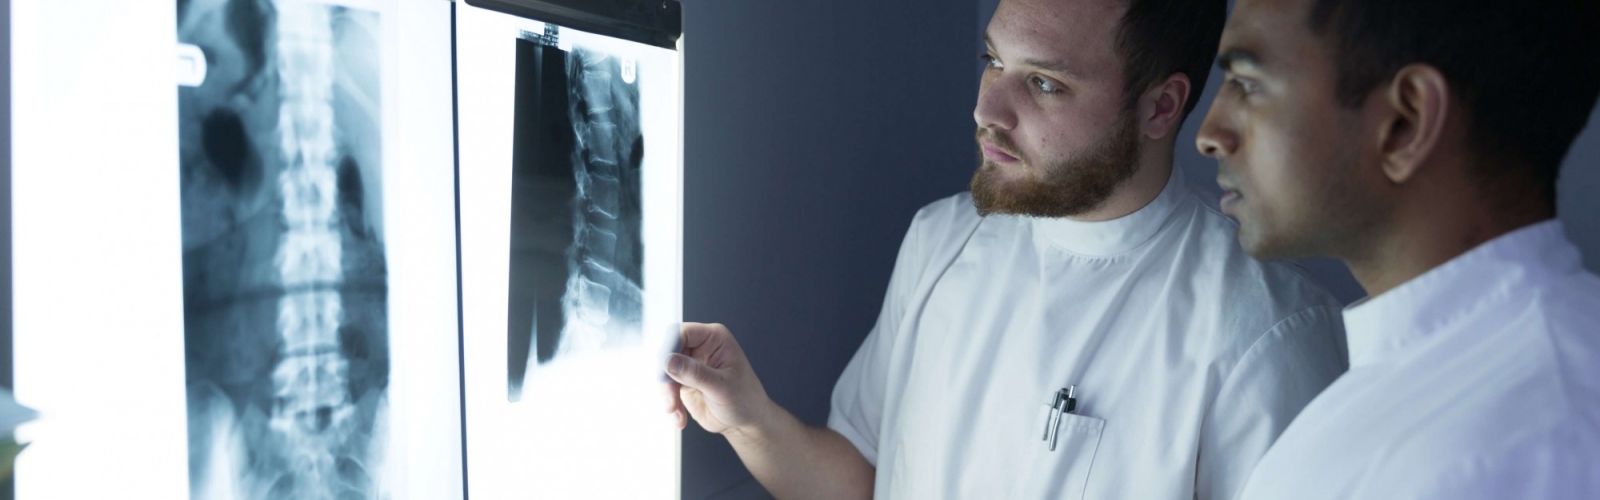 A pair of chiropractors looking at an x-ray